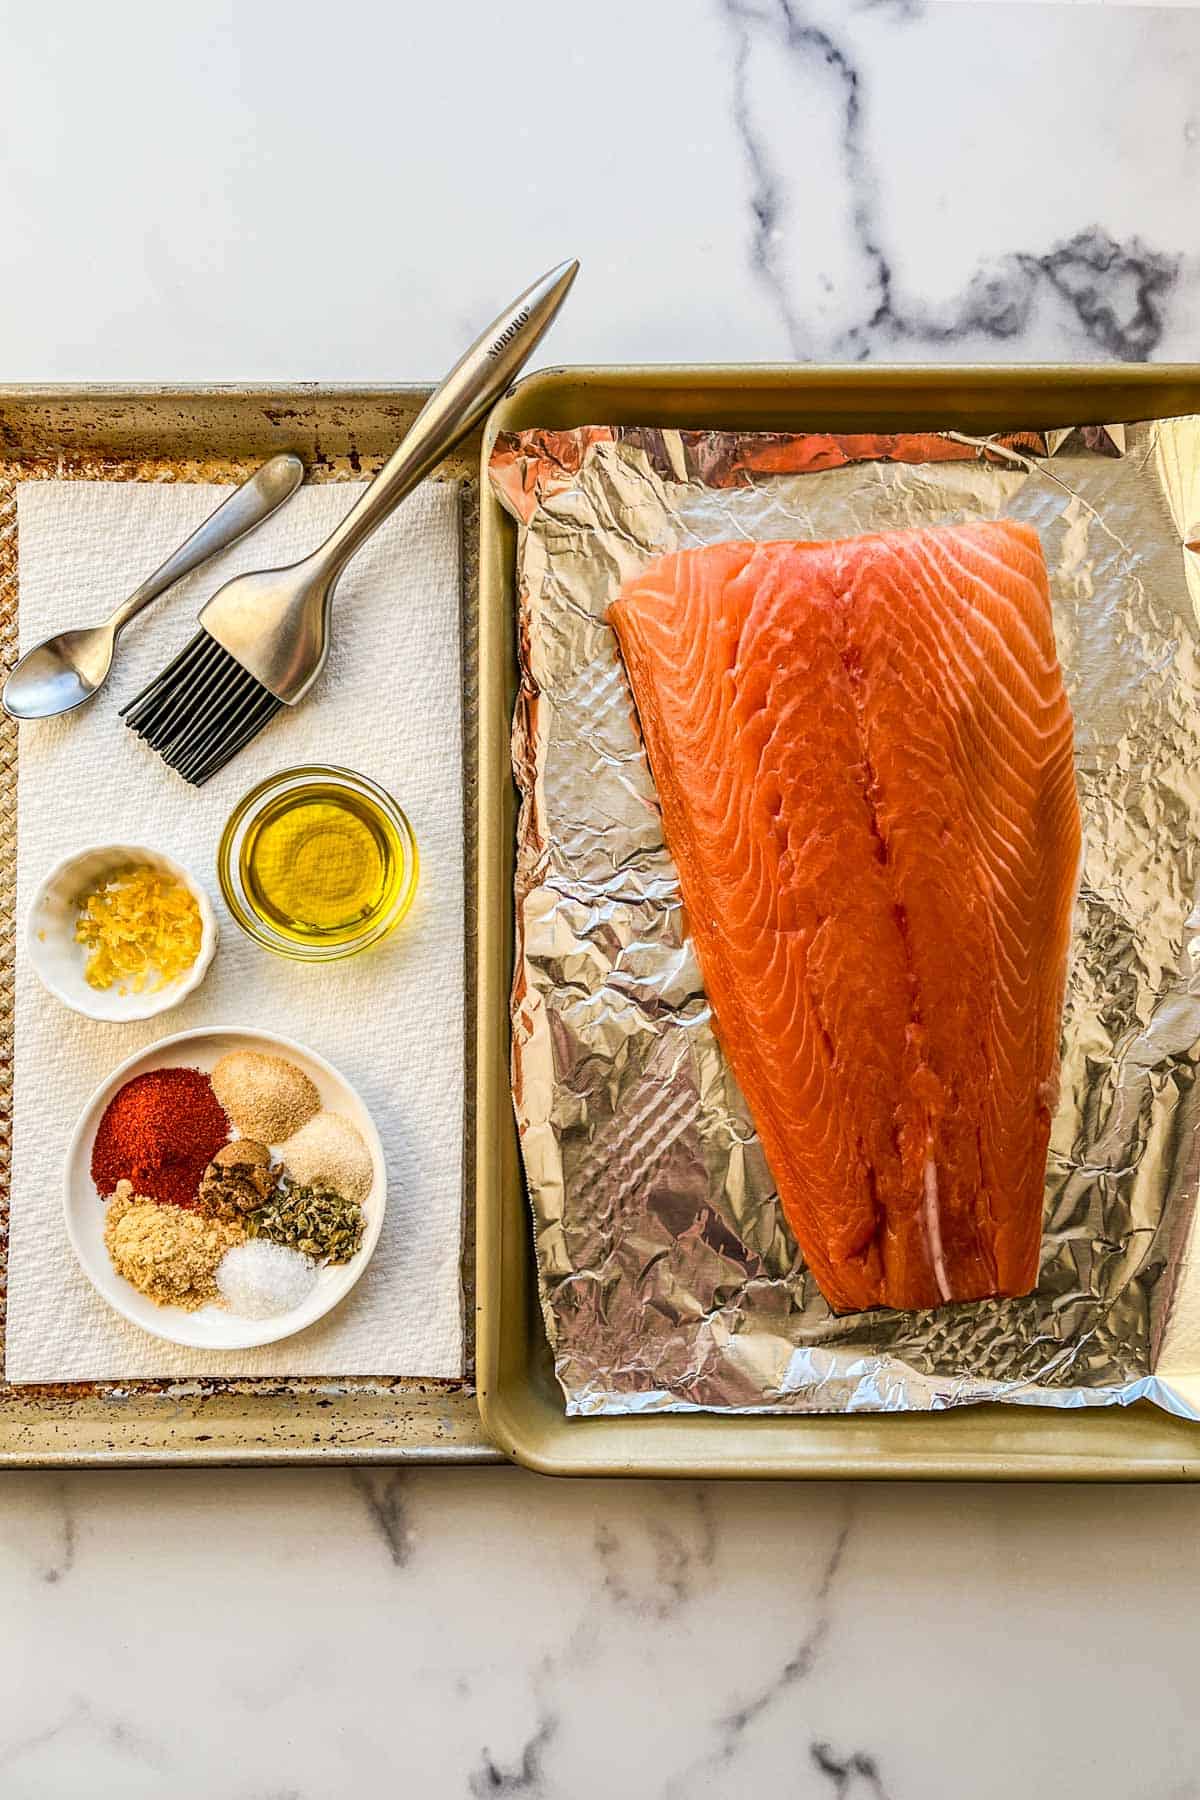 Ingredients for broiled salmon on a rimmed baking sheet.